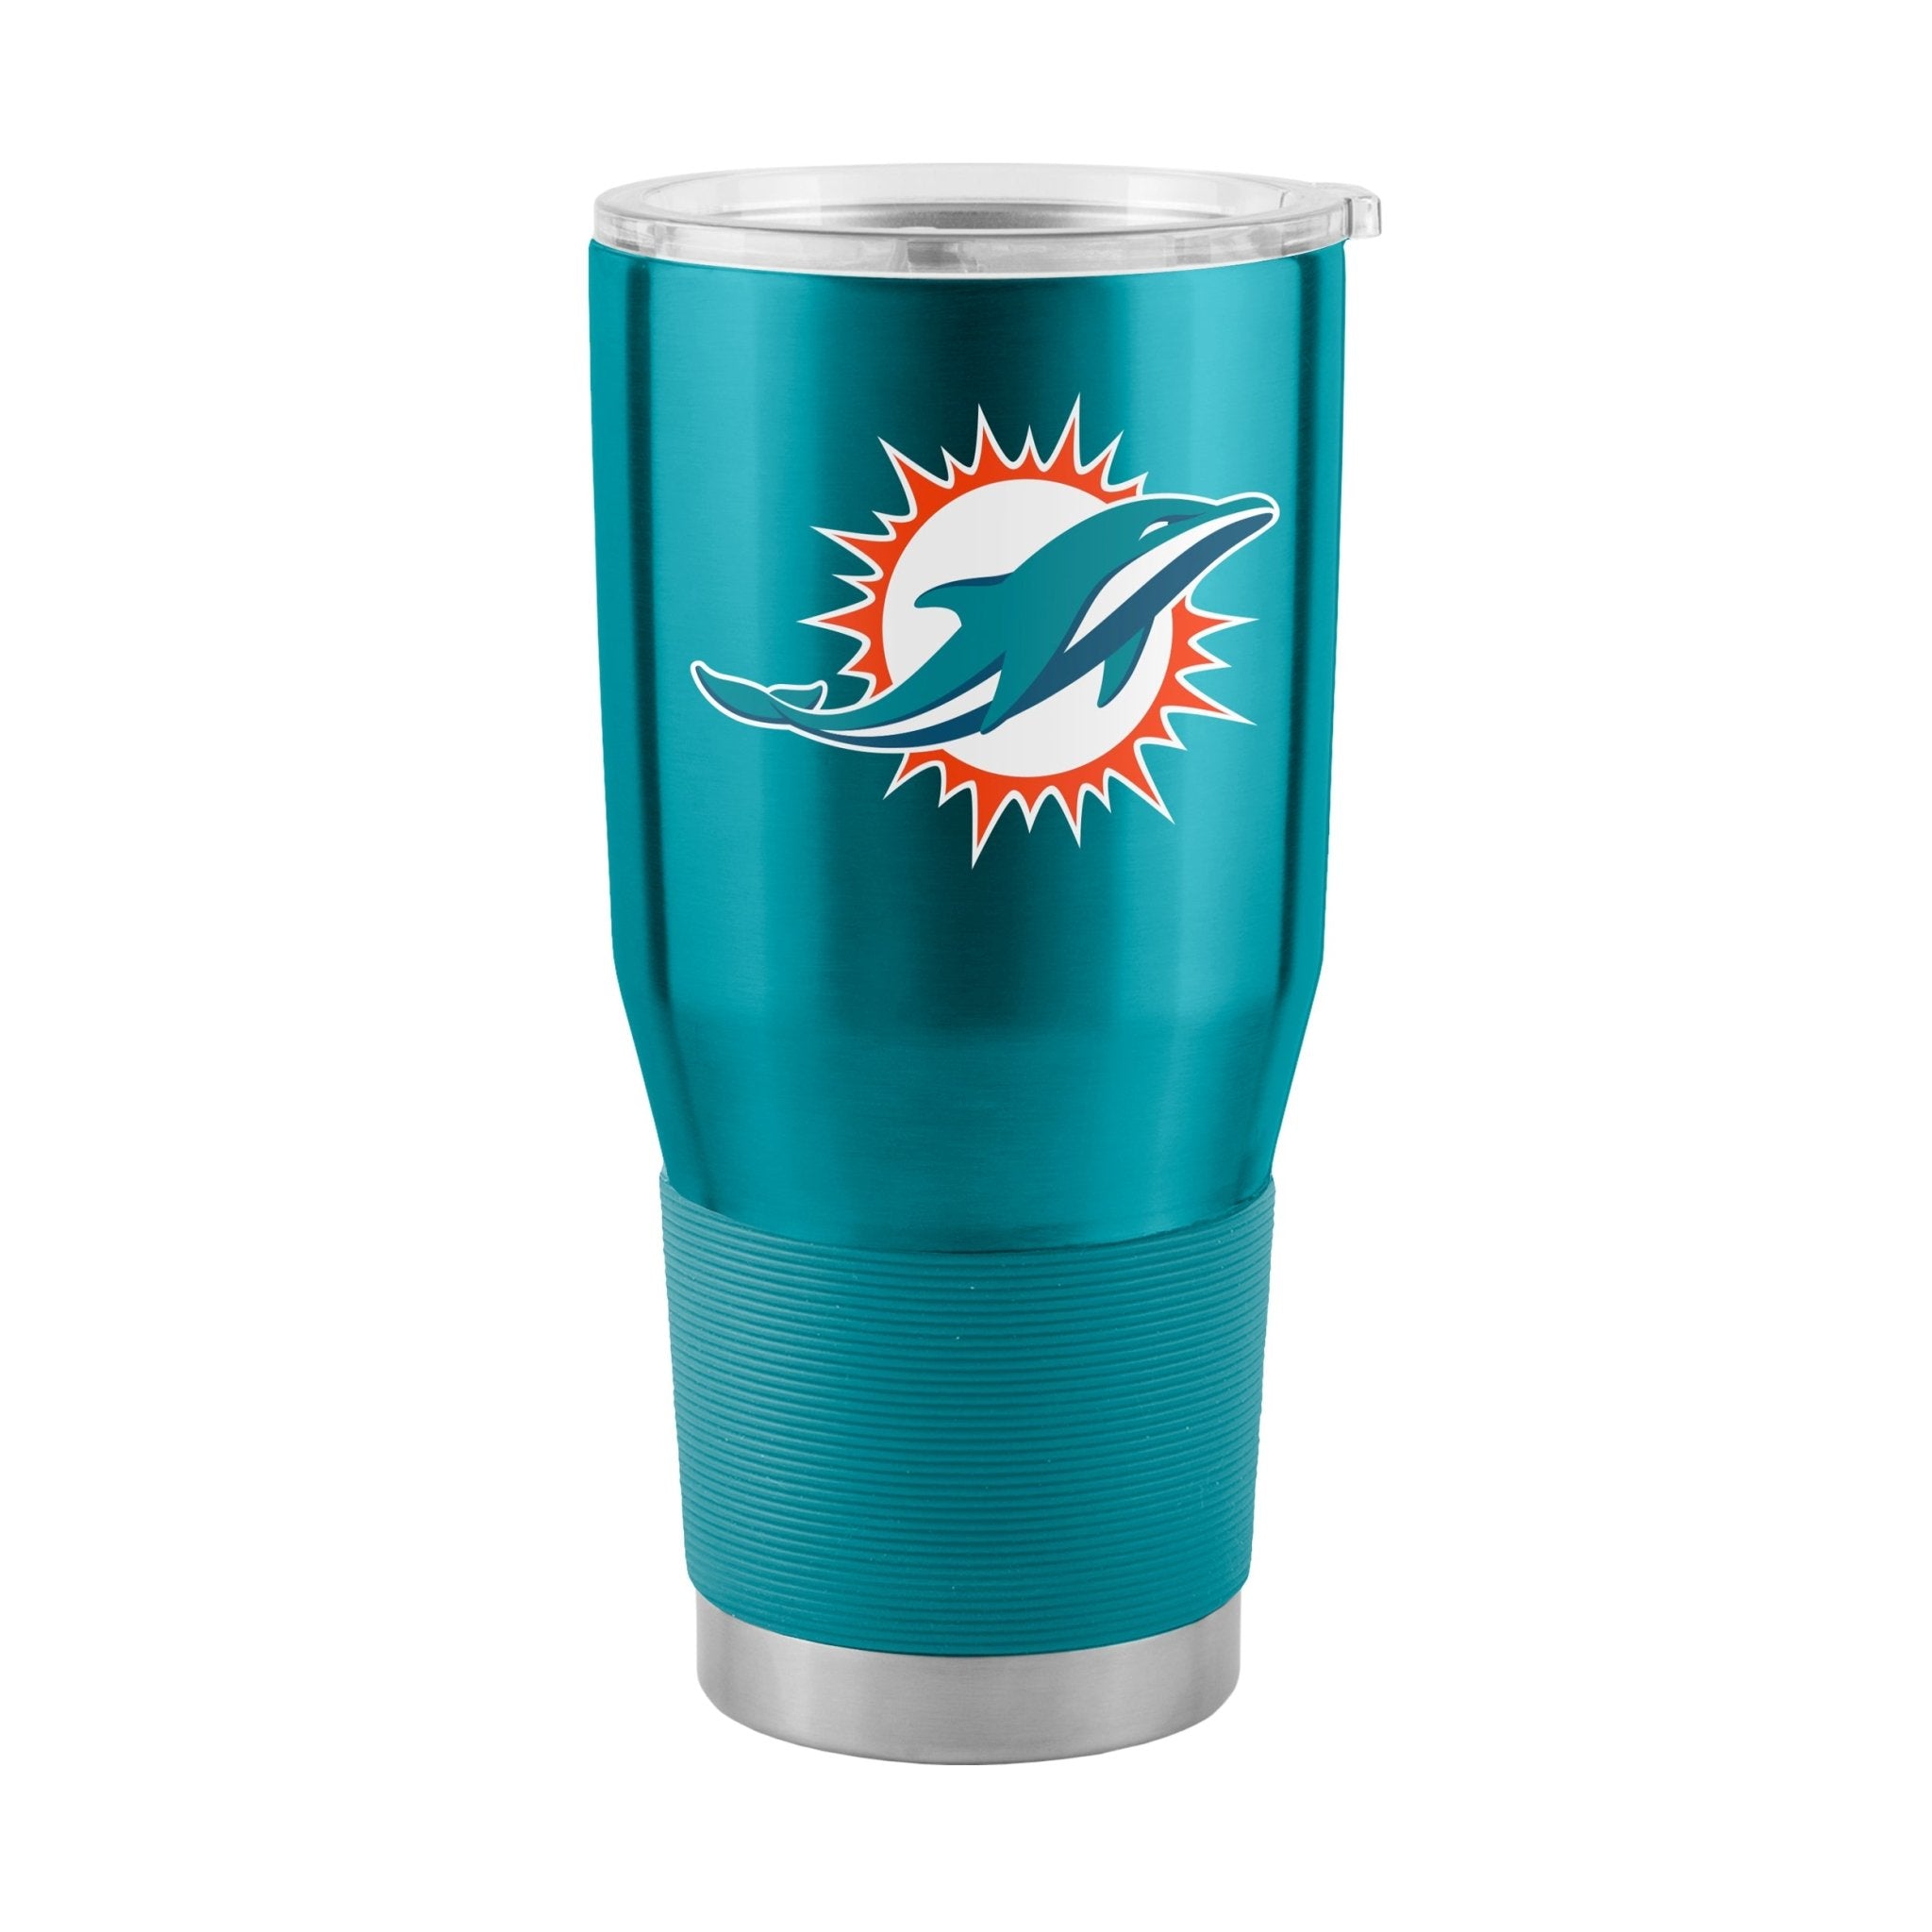 GAMEDAY!, By Miami Dolphins